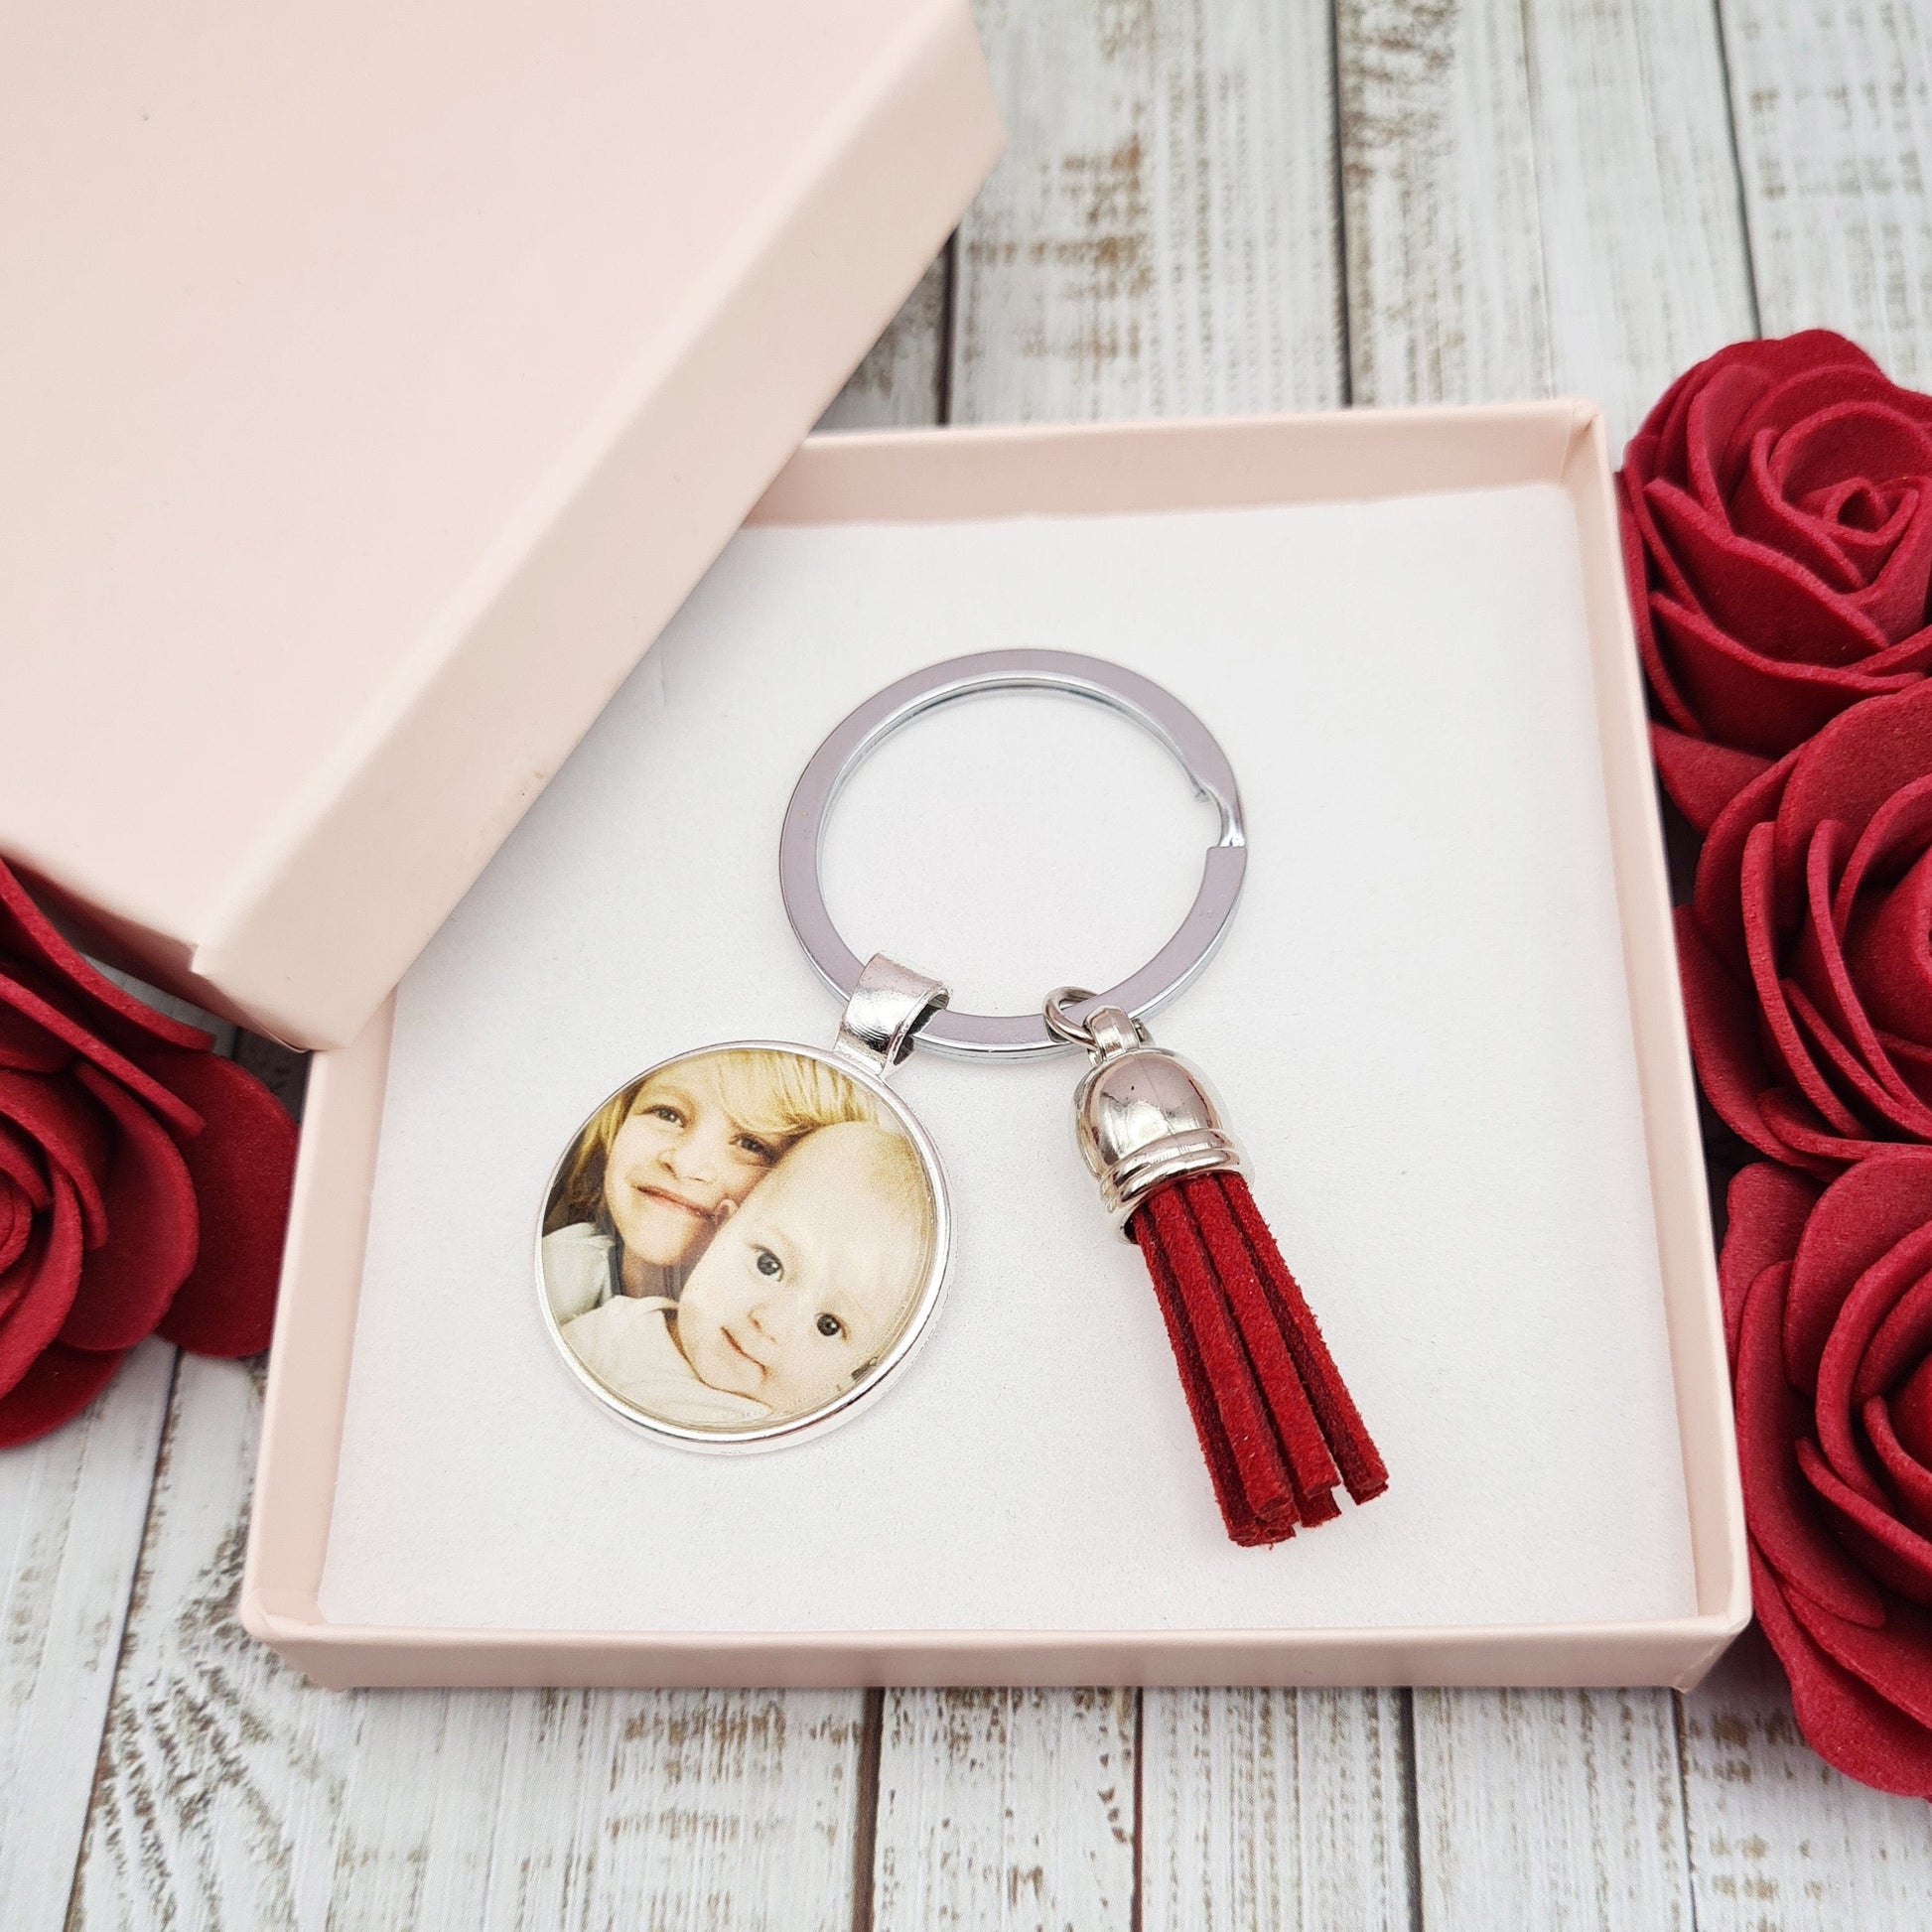 Silver key ring with pendant personalised with a photo and a tassel inside a pink gift box